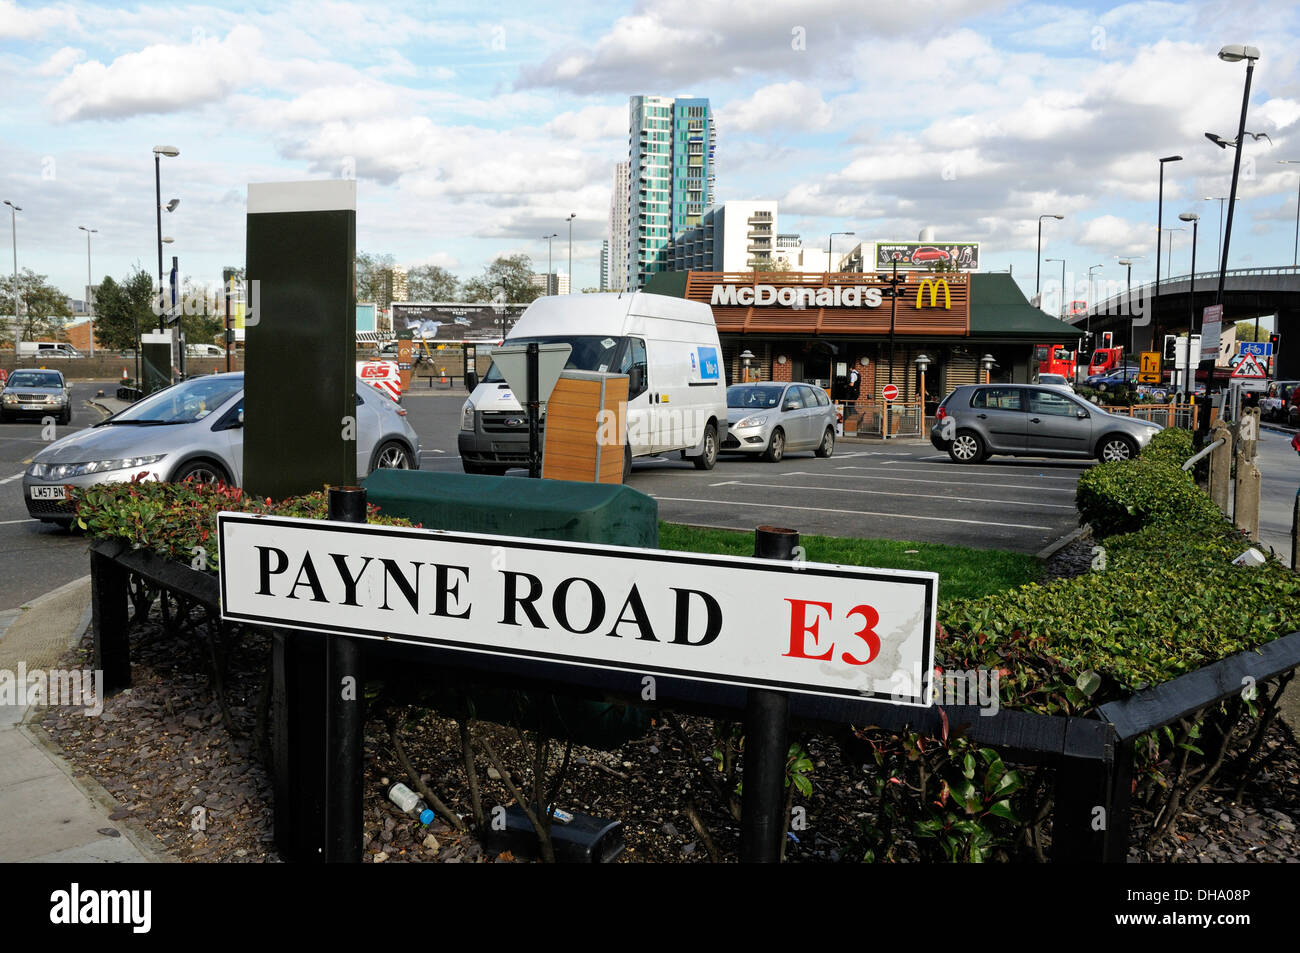 Payne Road E3 sign with McDonald's in background, Bow Flyover, Bow Road, Tower Hamlets London England UK Stock Photo